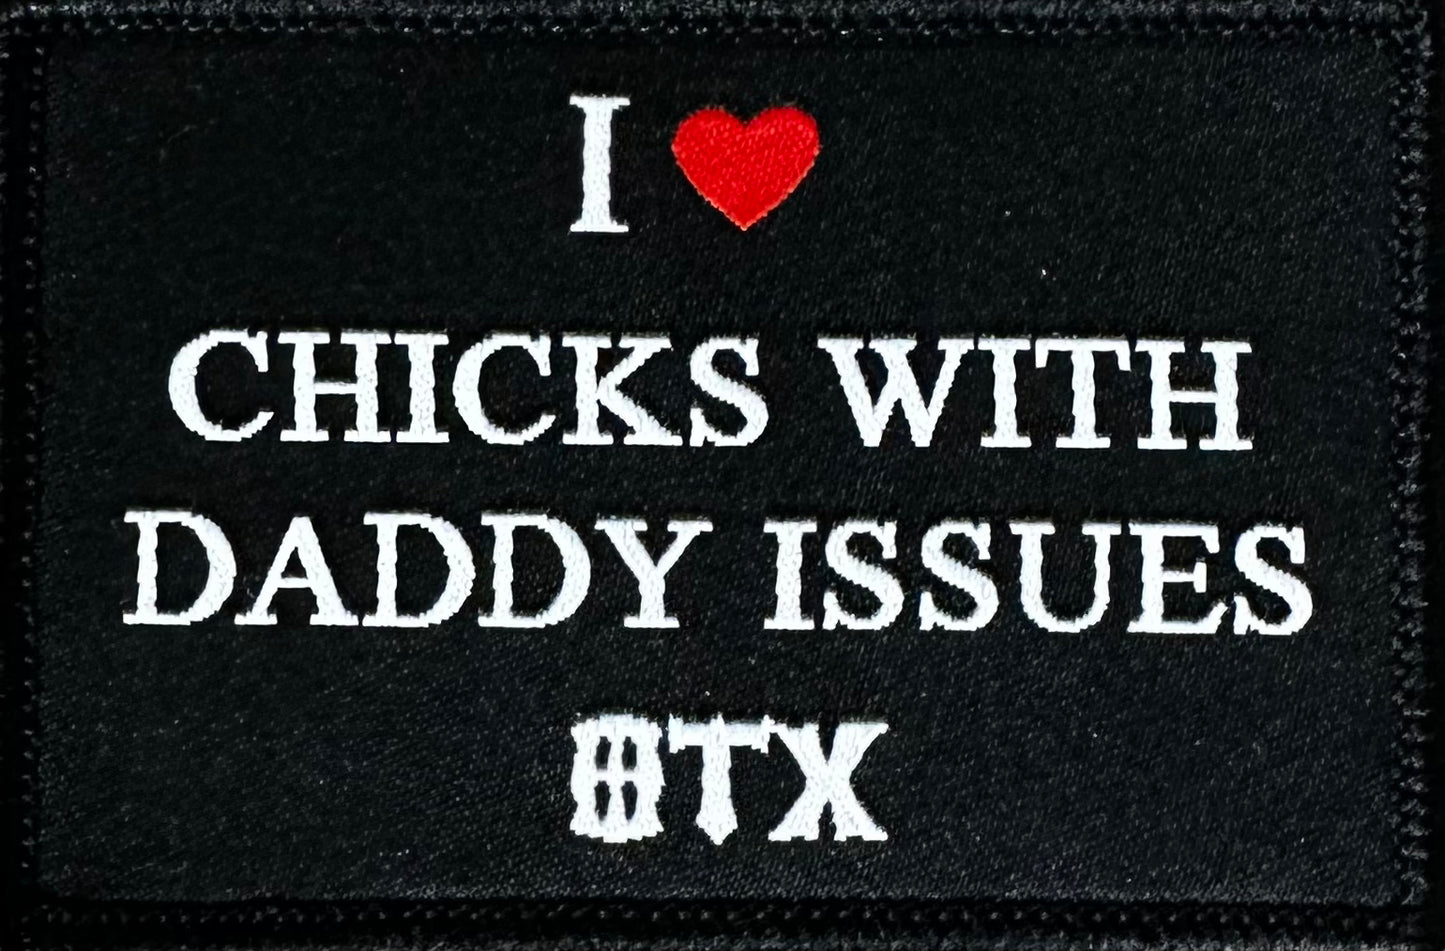 DADDY ISSUES Patch